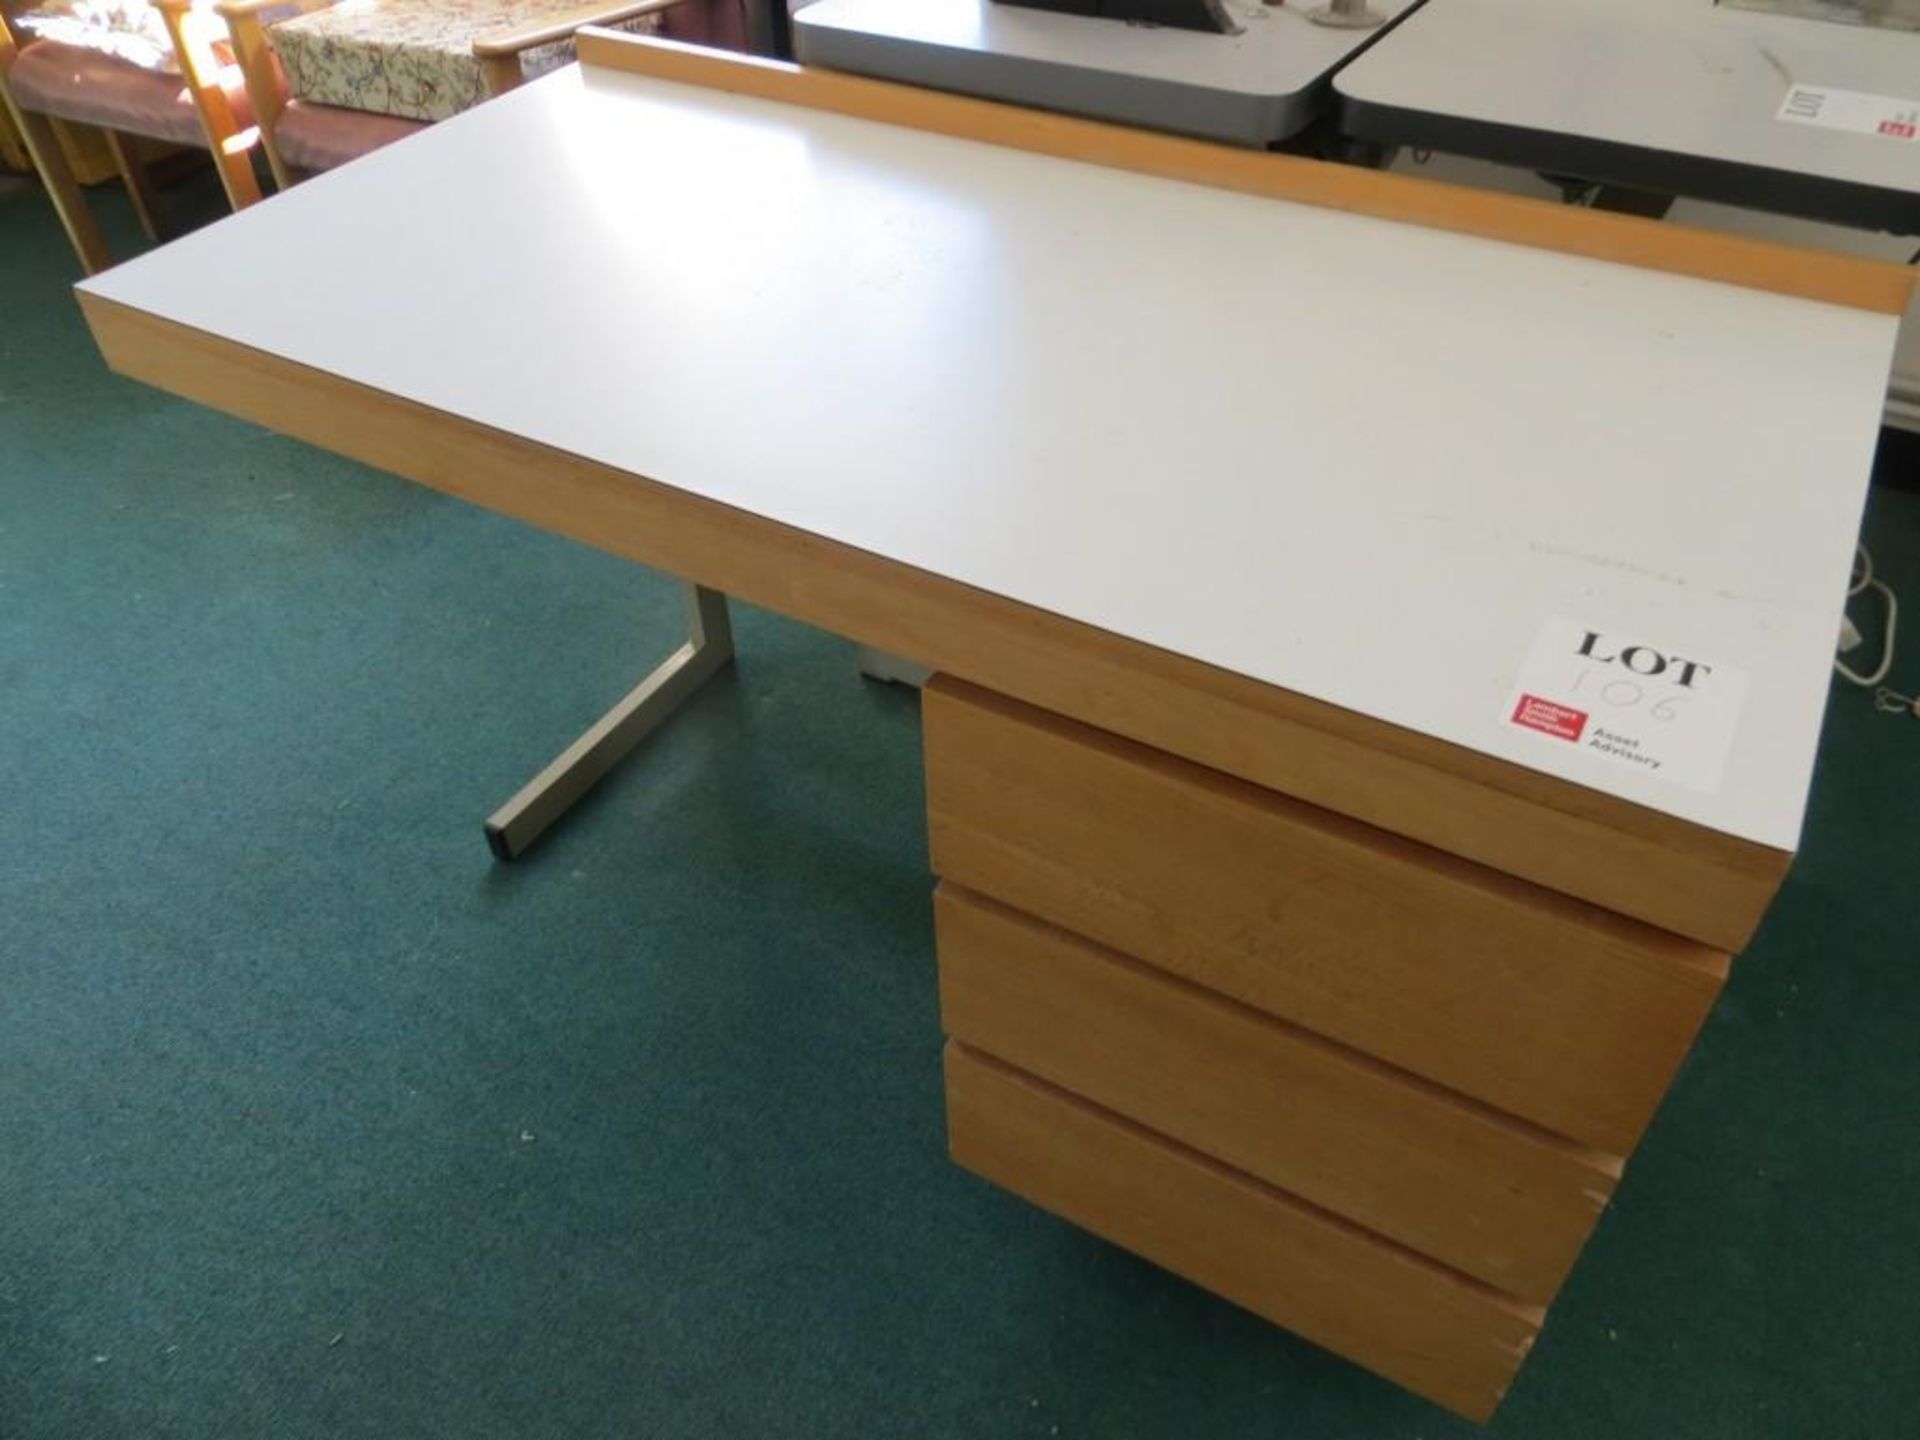 3 single pedastal desks, table, 4 position storage cabinet, coffee table, 5 notice boards and an - Image 5 of 8